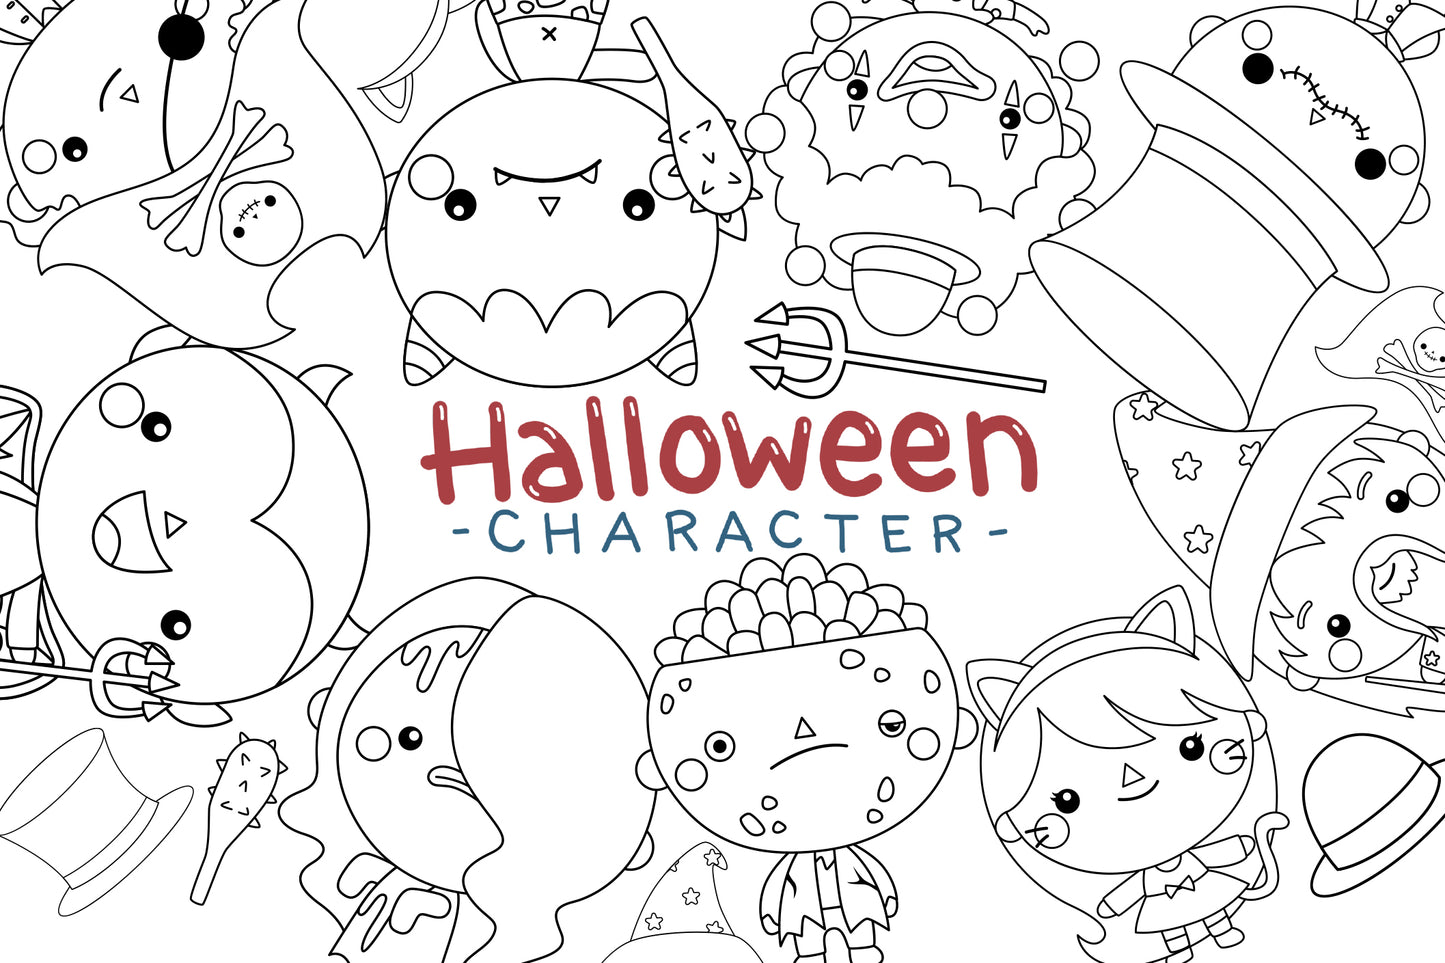 Halloween Costume Clipart - Cute Monster Clip Art Coloring